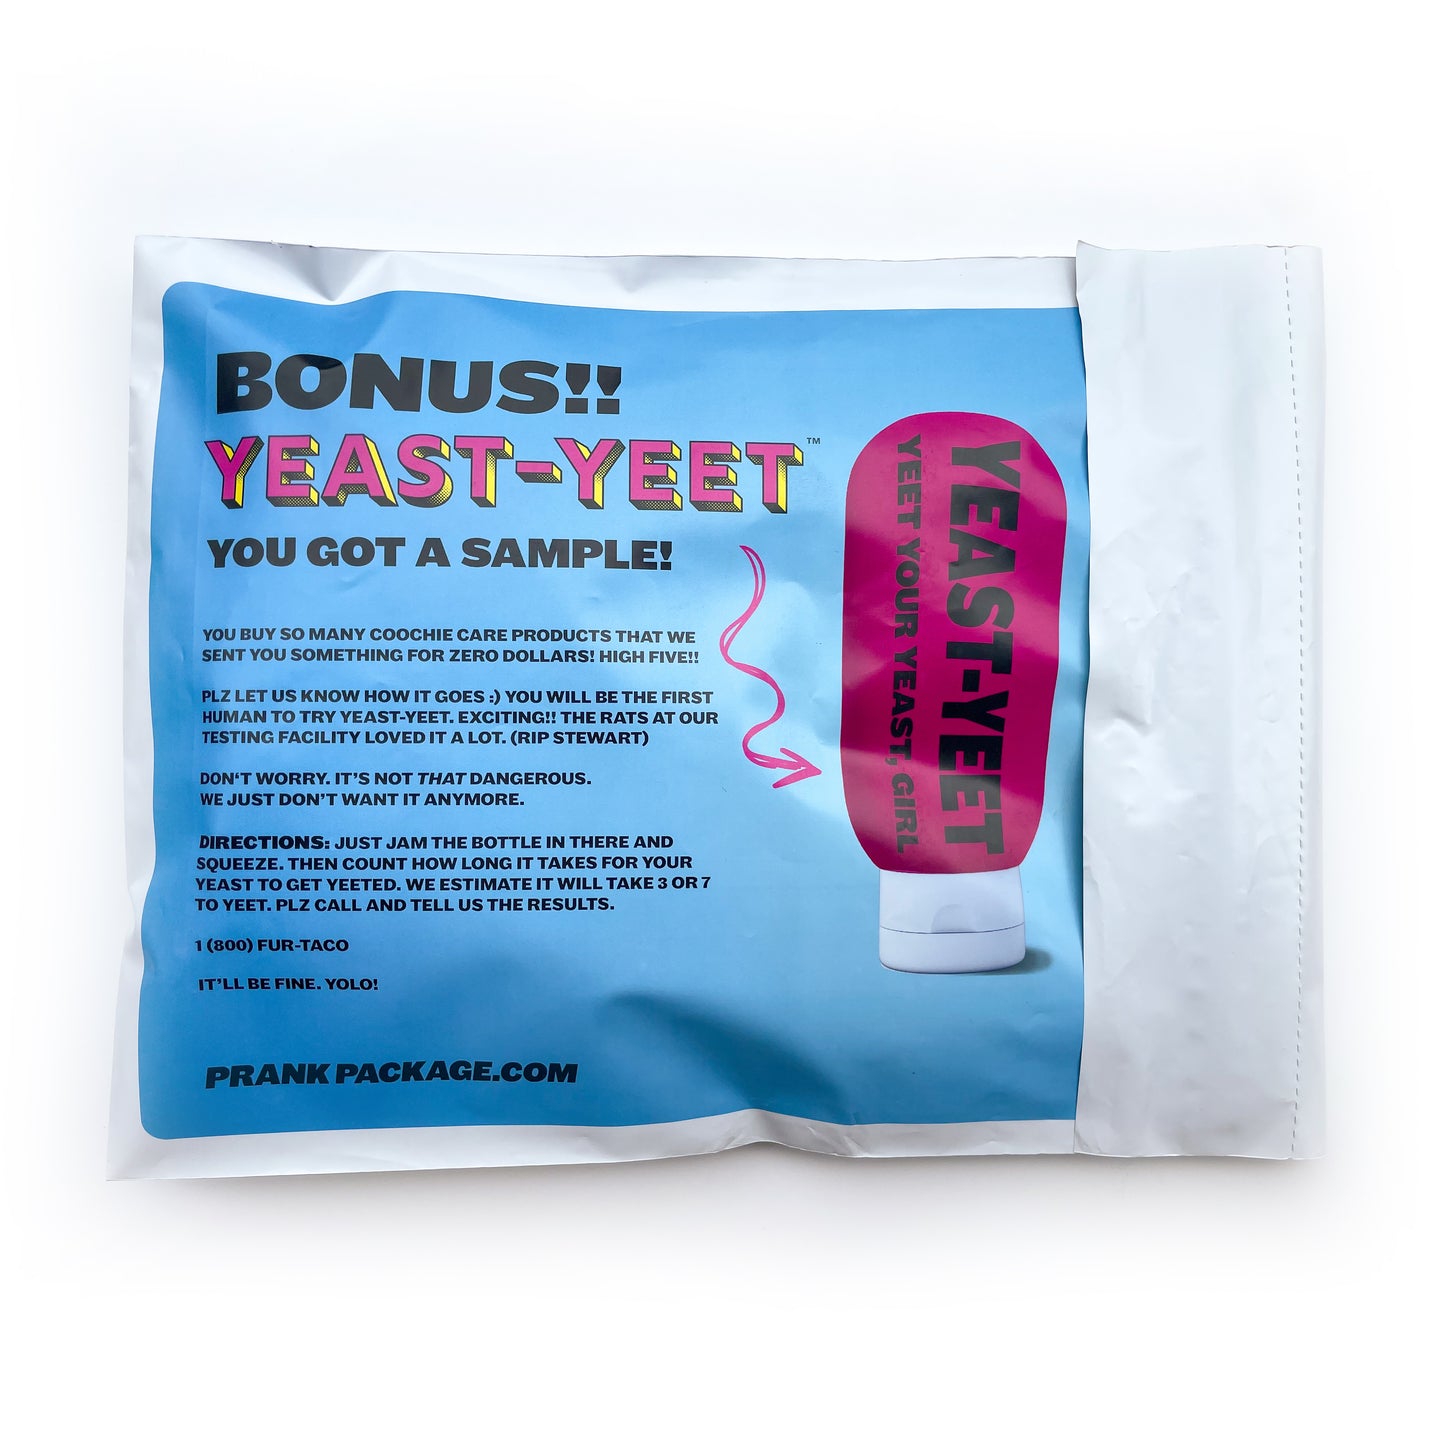 The backside of the 'Vaginal Odor' prank mailer from PrankPackage.com features a free sample of Yeast-Yeet, an embarrassing fake product that yeets a woman's yeast.